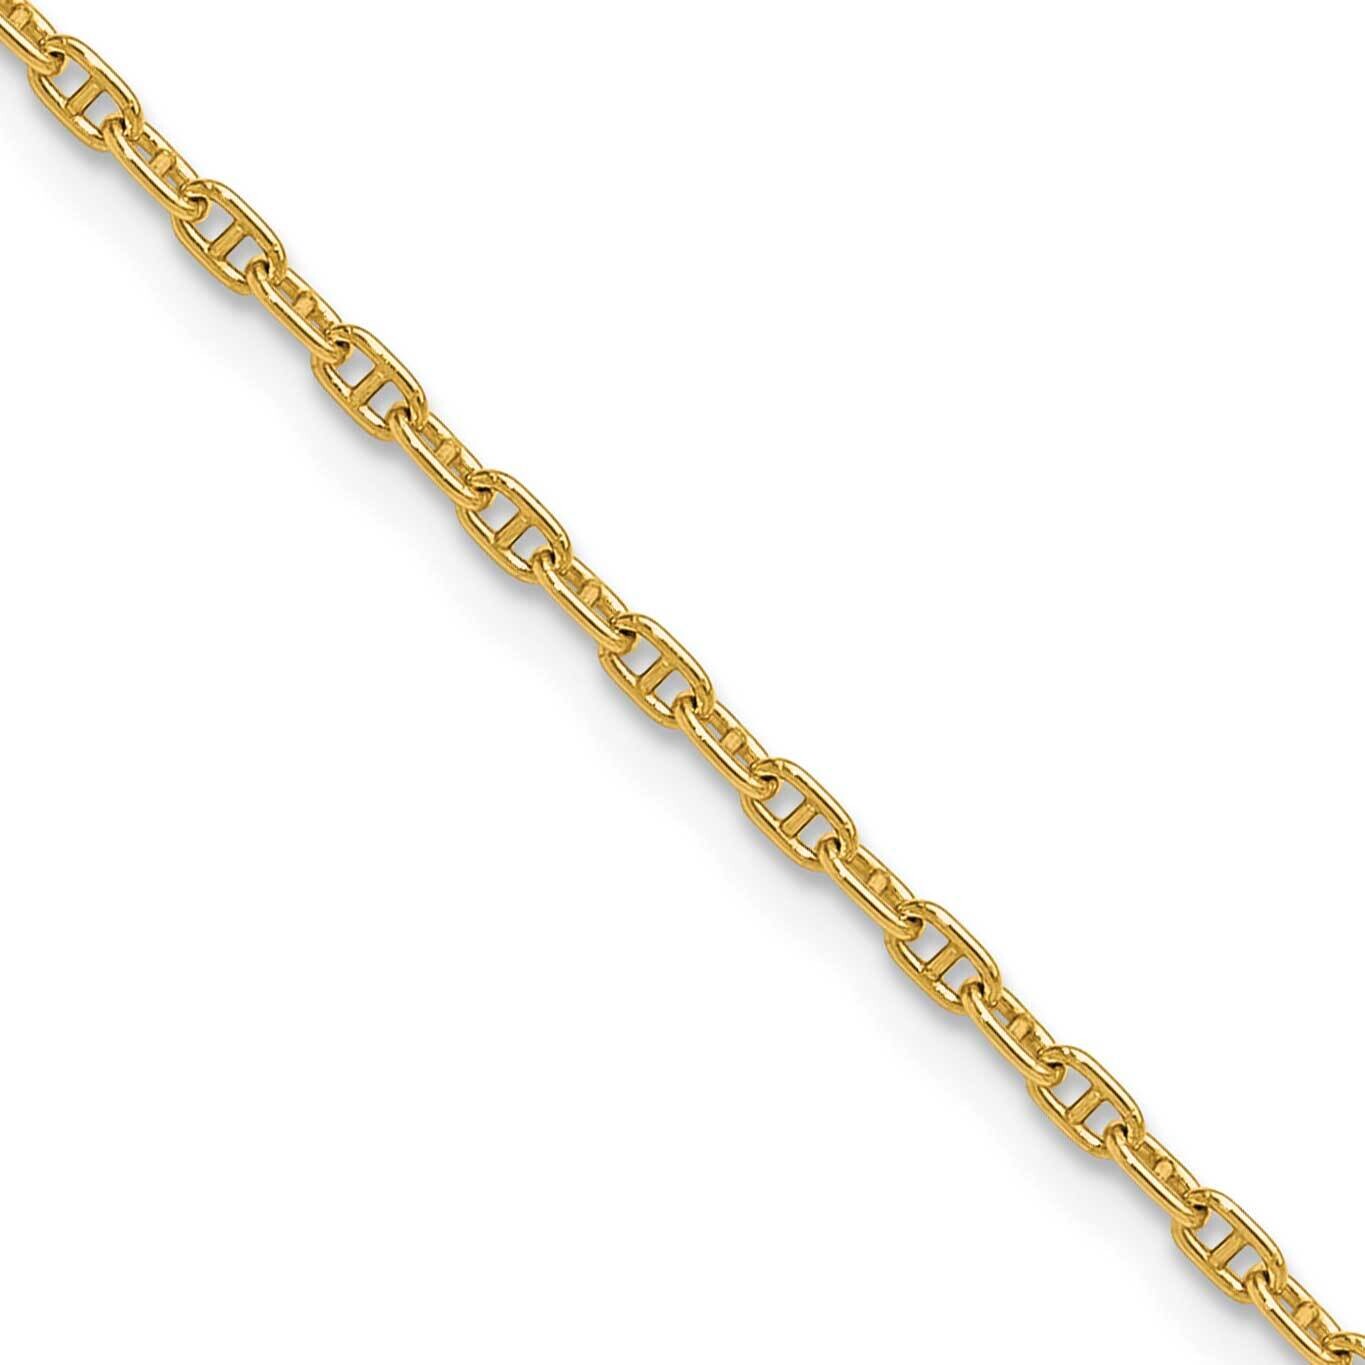 1.8mm Mariners Link Chain 20 Inch 14k Gold MA050-20